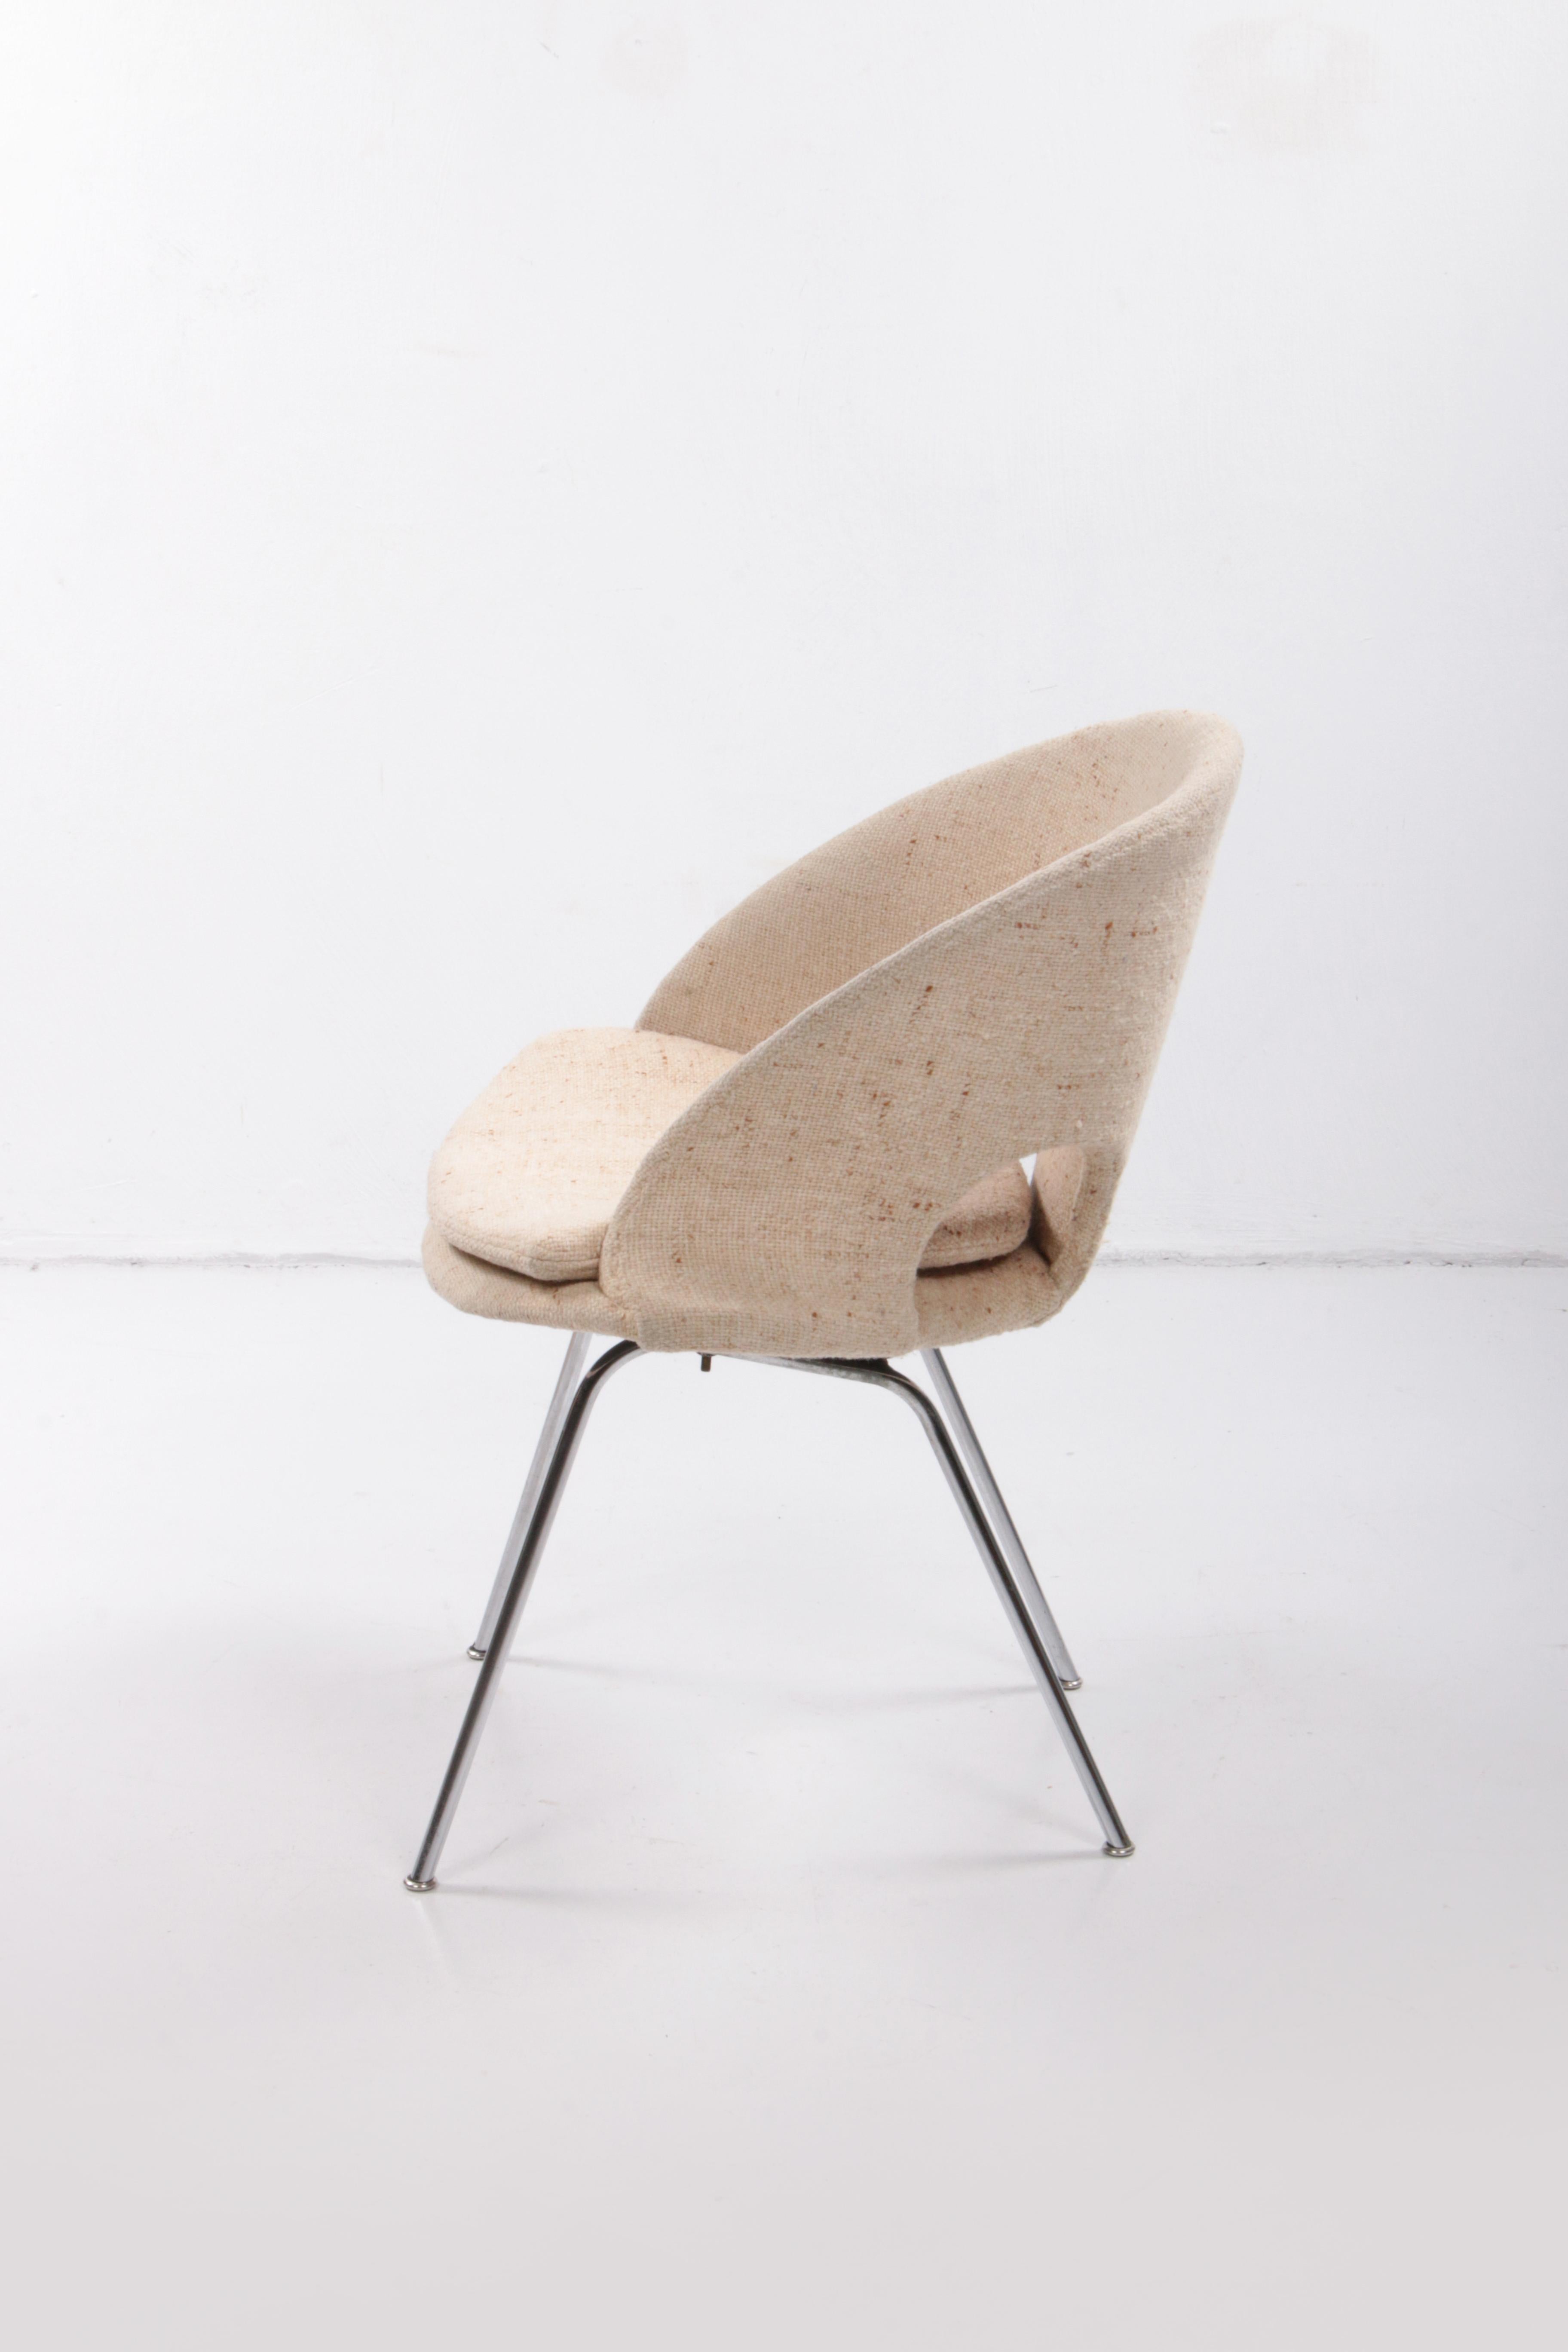 Walter Knoll Lounge Chair by Arno Votteler Model 350, 1950s For Sale 6